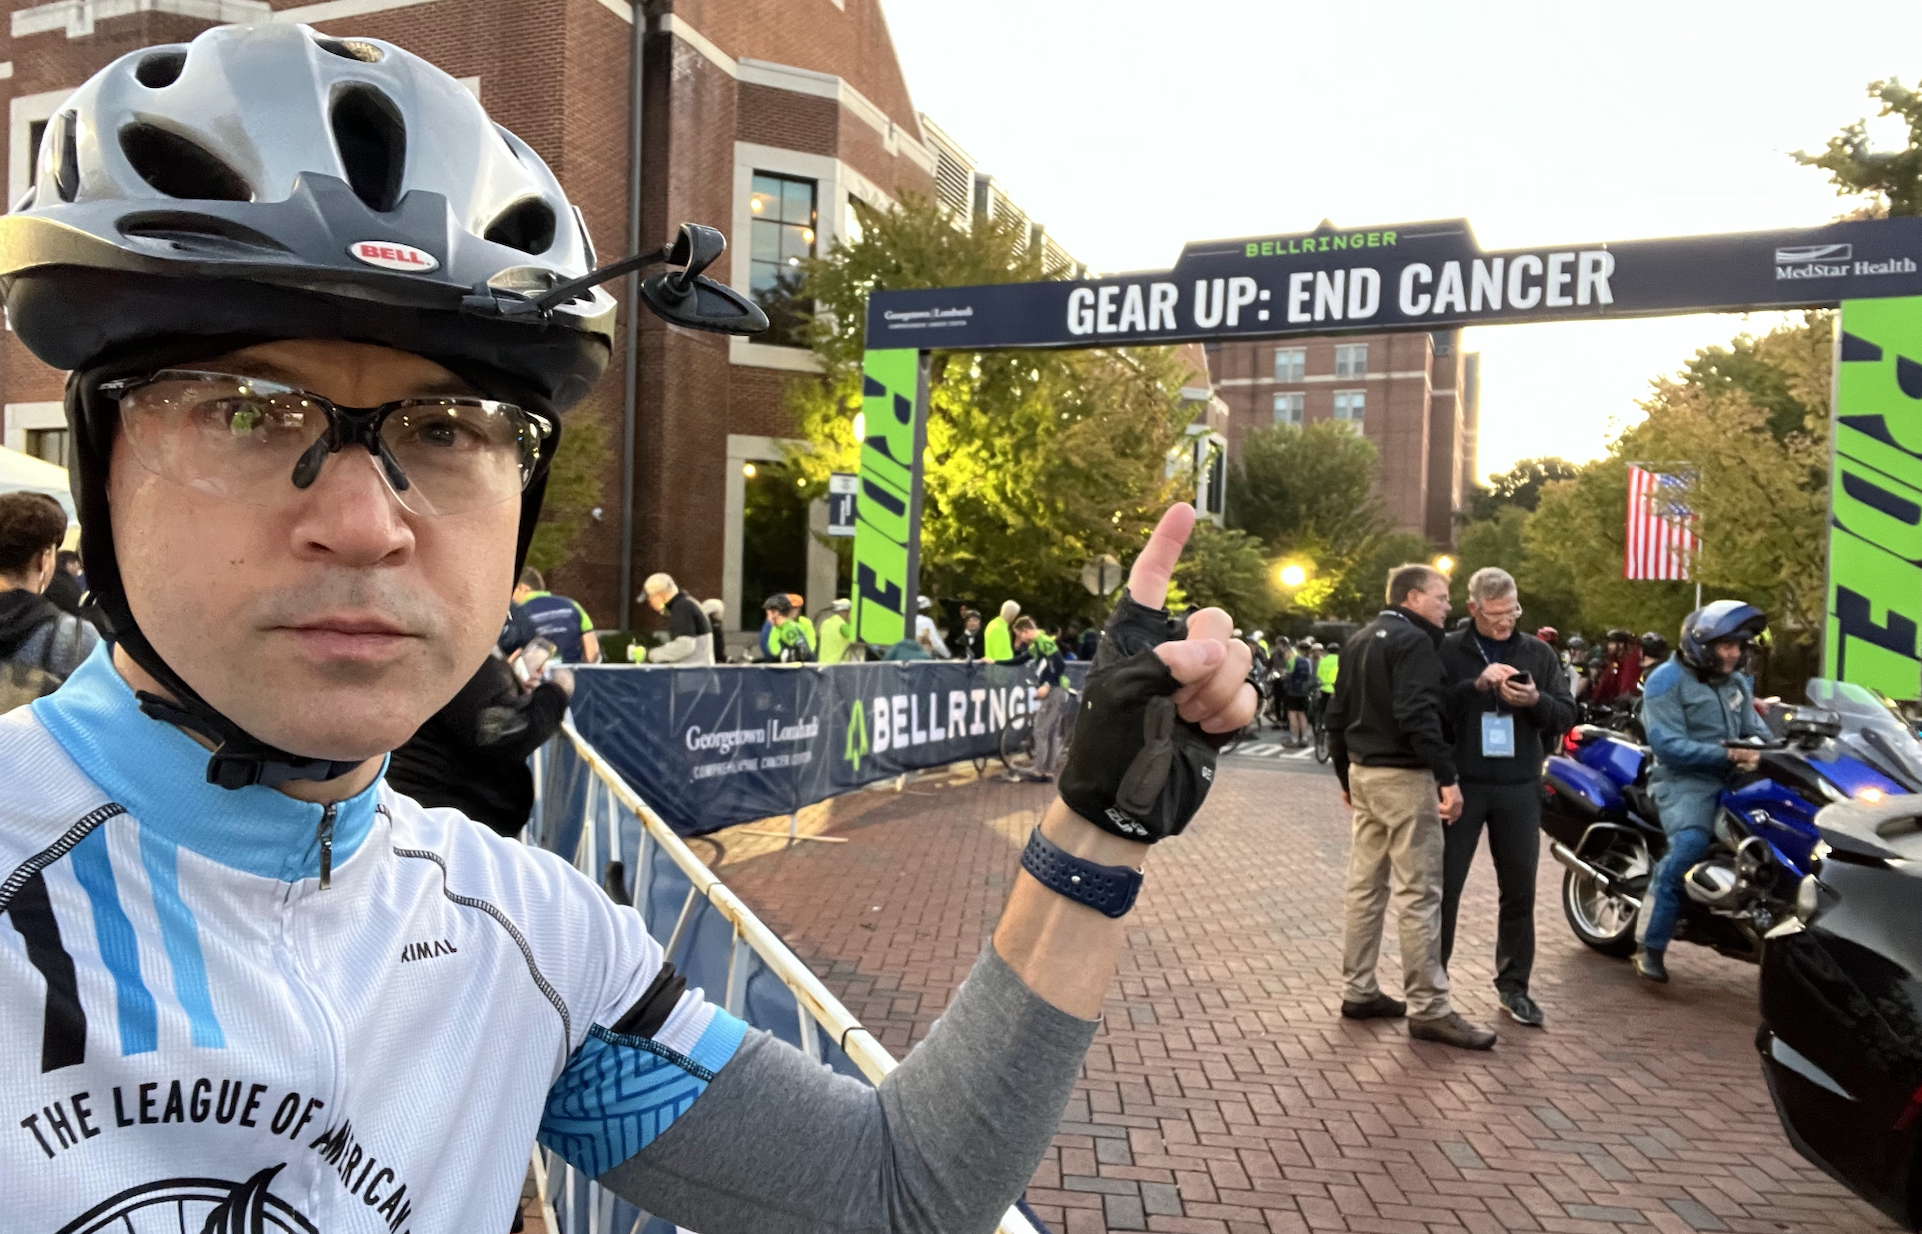 BellRinger rider posing with the start line of the ride